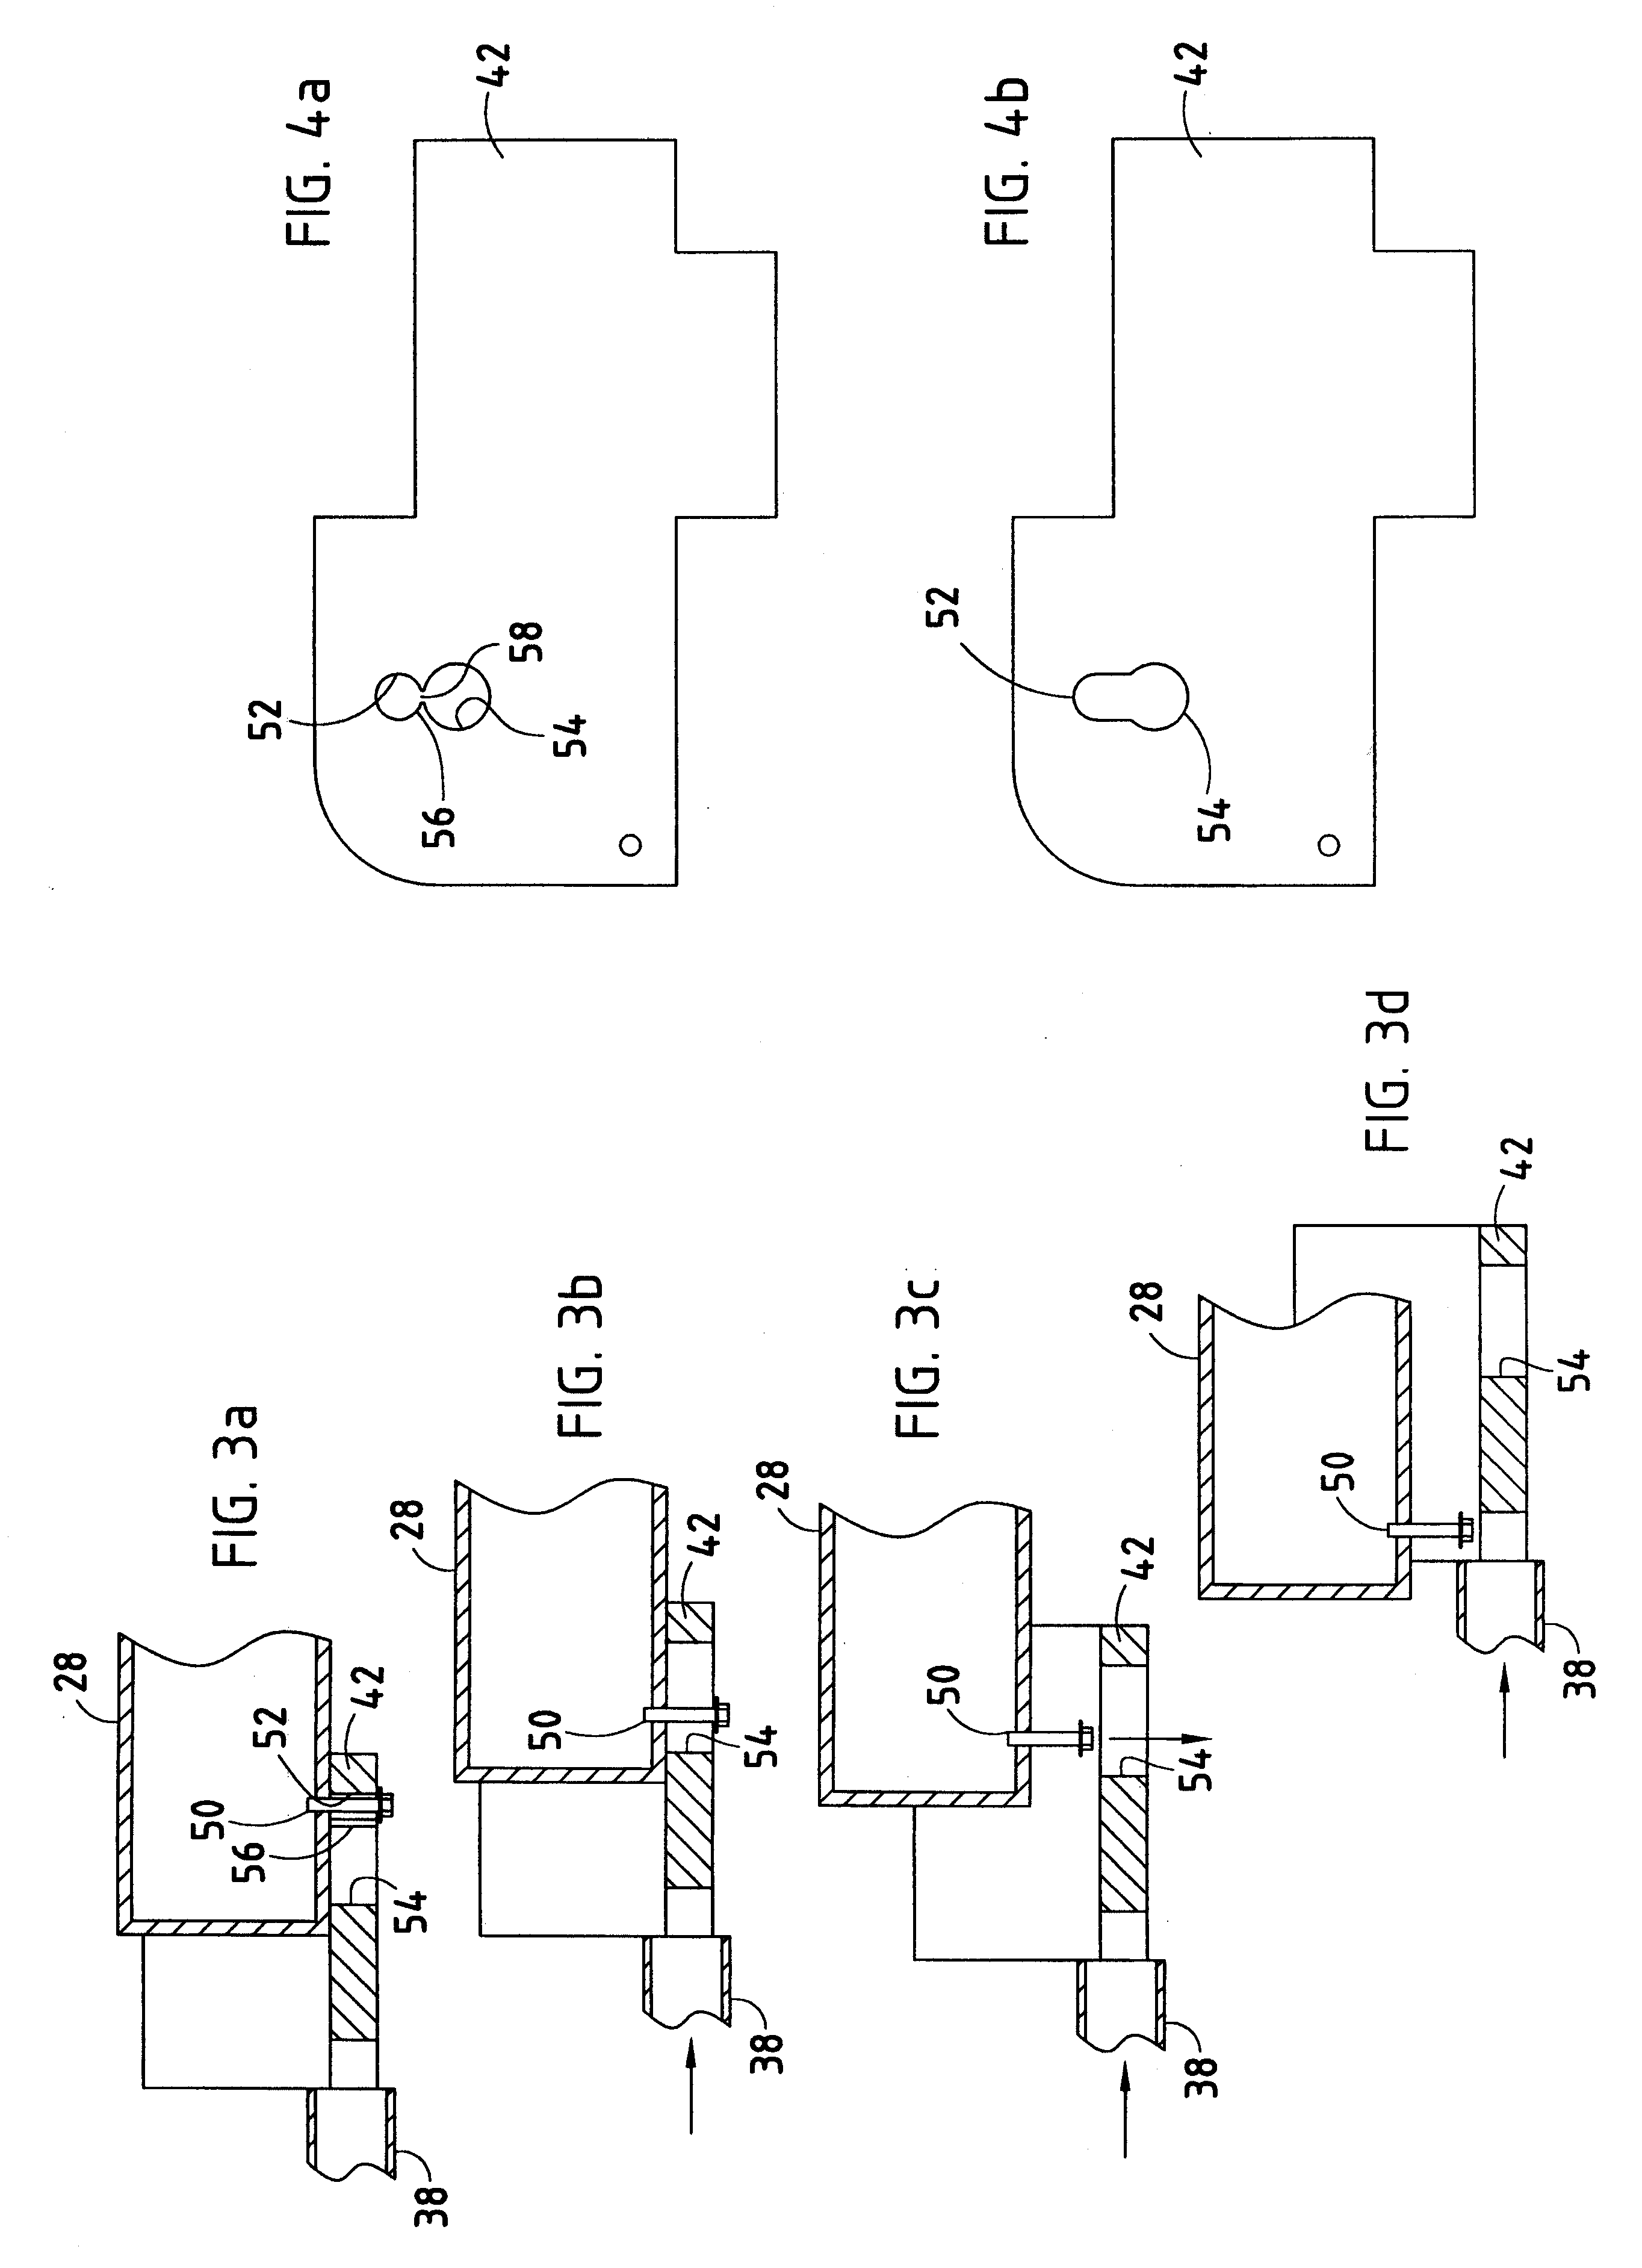 Energy management system and method for an extruded aluminum vehicle subframe